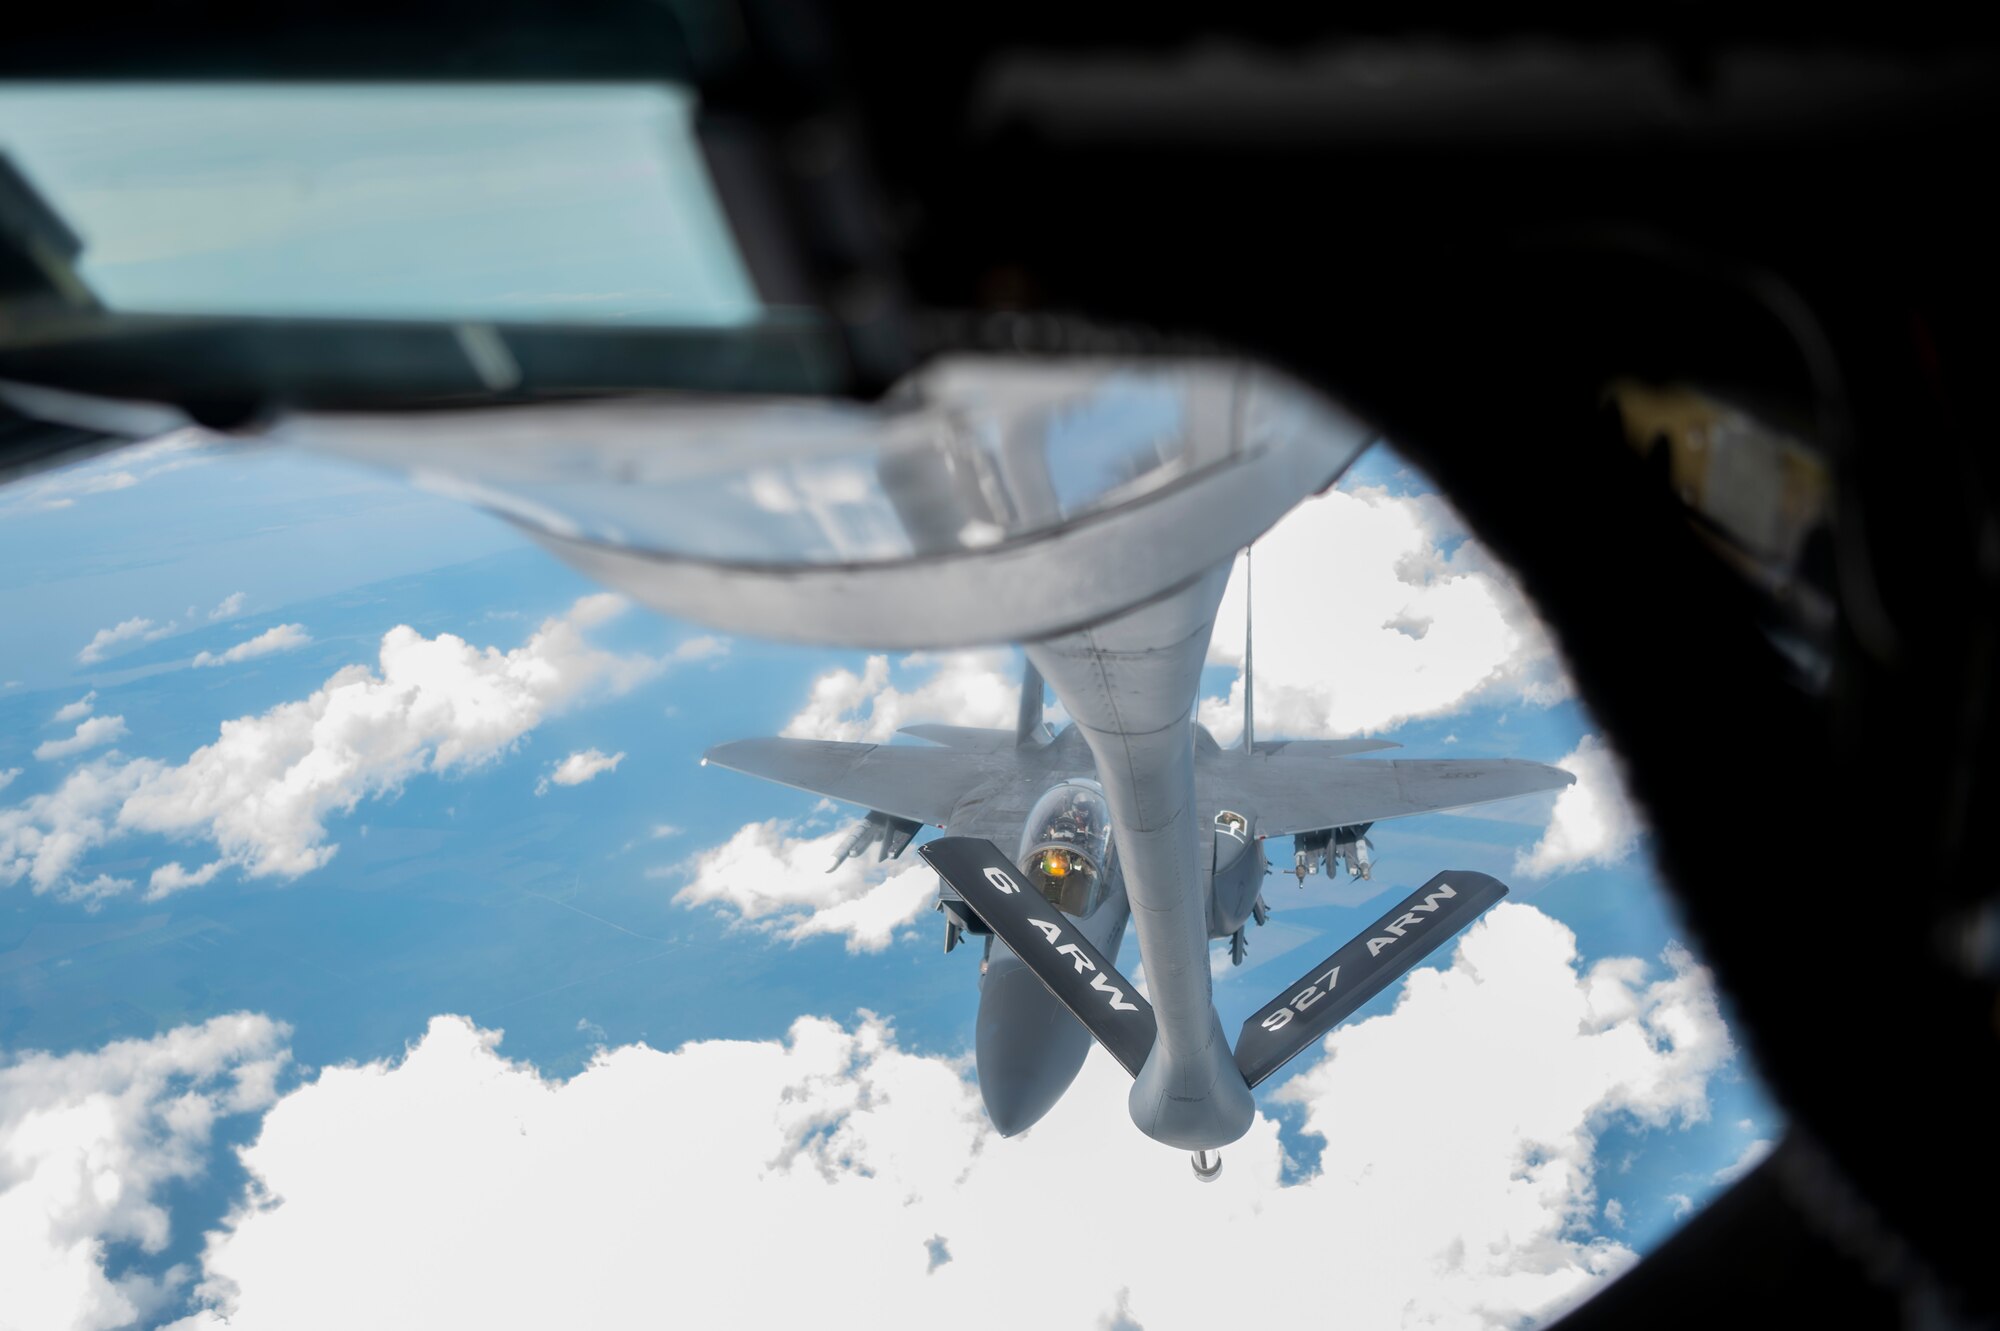 An F-15E Strike Eagle assigned to the 4th Fighter Wing, approaches a KC-135 Stratotanker assigned to the 91st Air Refueling Squadron over the Northeastern U.S. Aug. 24, 2022.